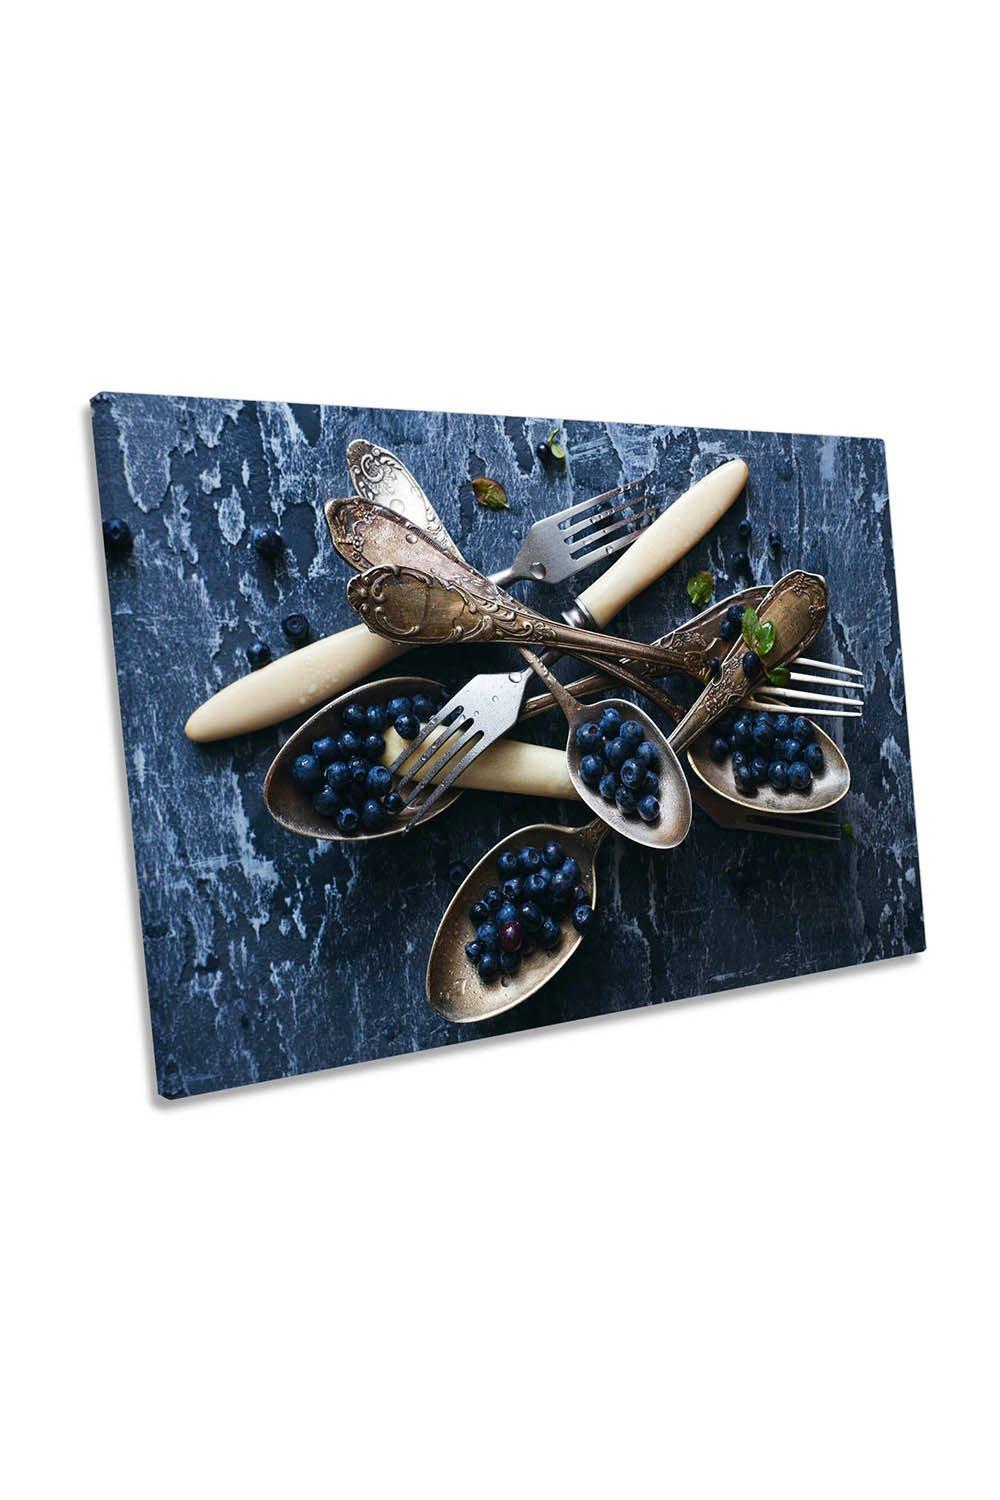 Spoons Blue Berries Kitchen Home Canvas Wall Art Picture Print